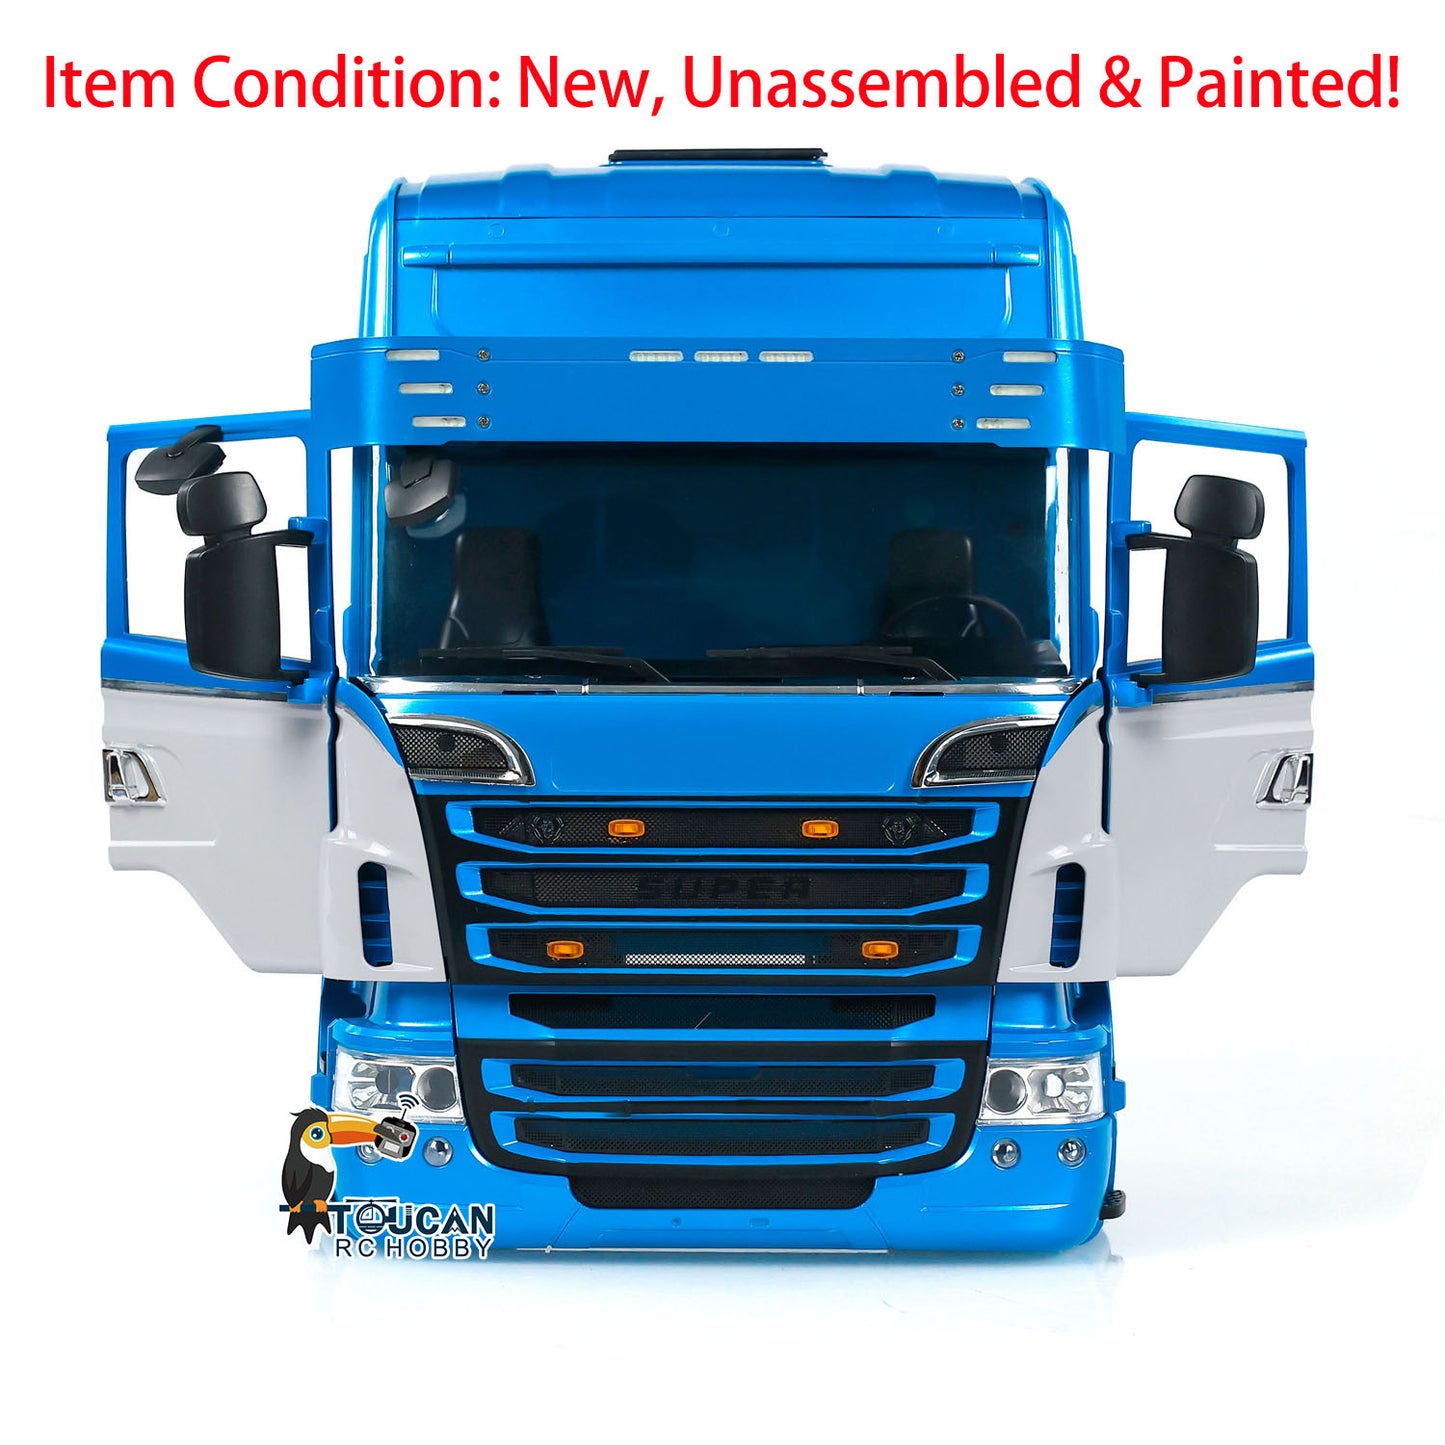 Plastic R730 Cabin Body Shell for 1/14 RC Car 6x6 6x4 Remote Control Tractor Simulation Truck Hobby Model DIY Painted